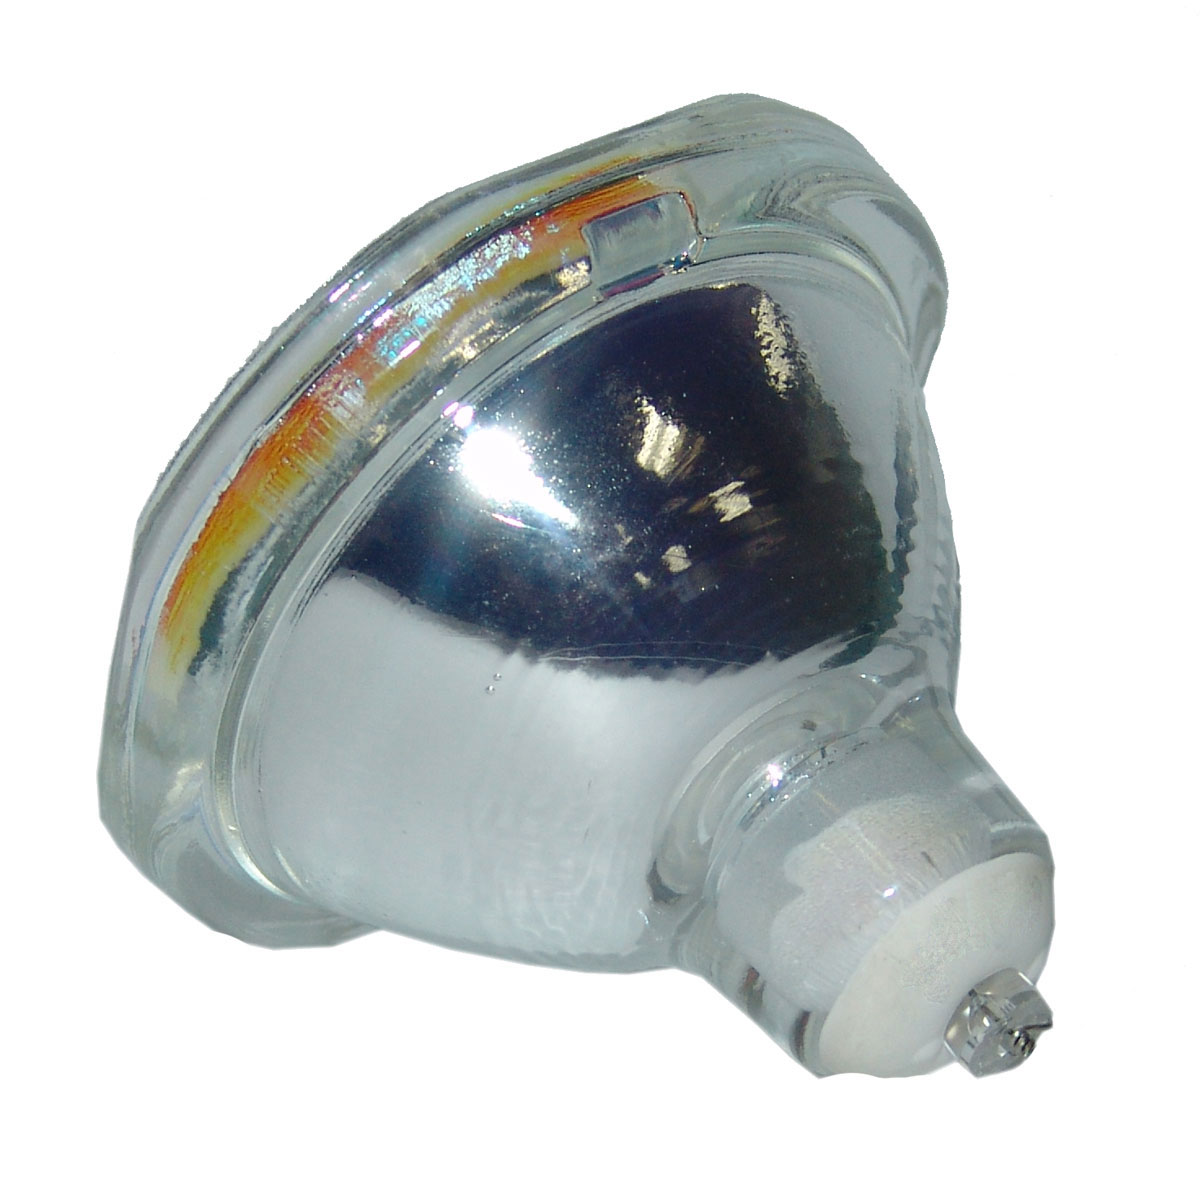 Lutema Economy for Hitachi DT00621 Projector Lamp (Bulb Only) - image 5 of 6